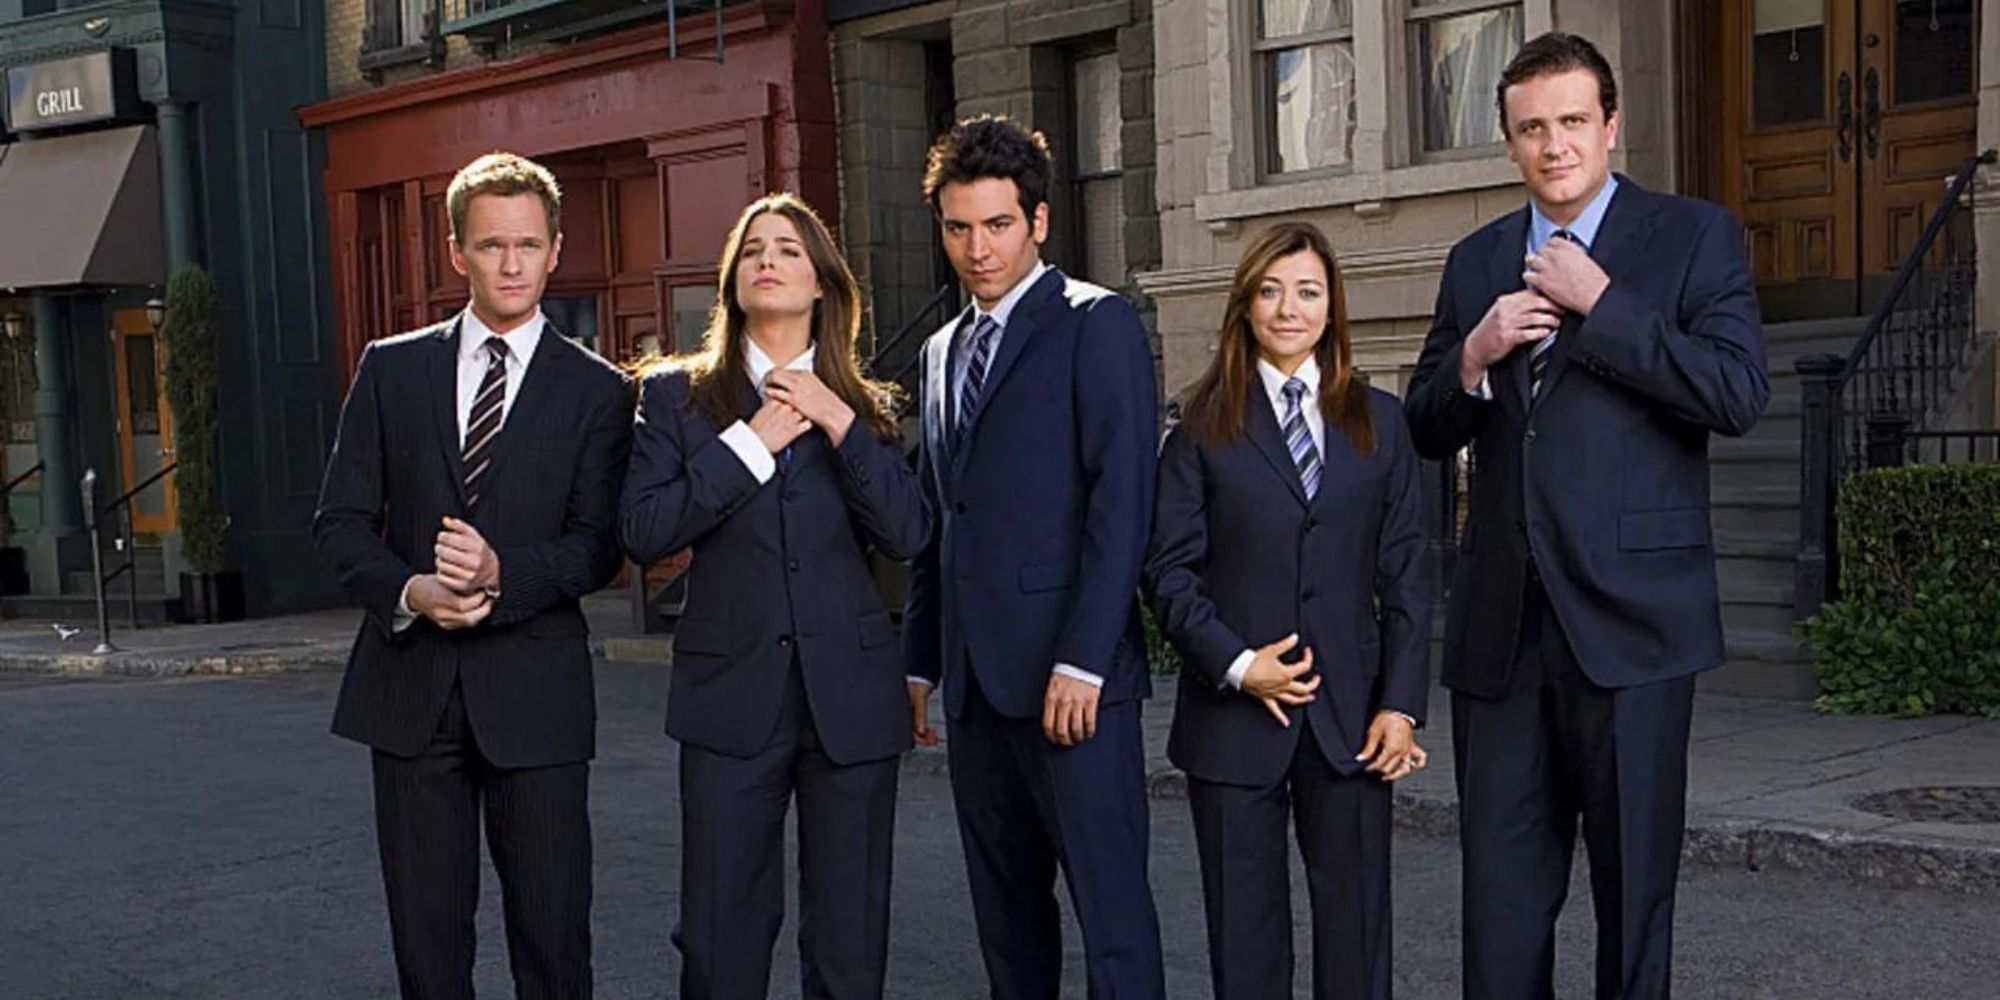 The 10 Biggest ‘How I Met Your Mother’ Plot Holes, According to Reddit